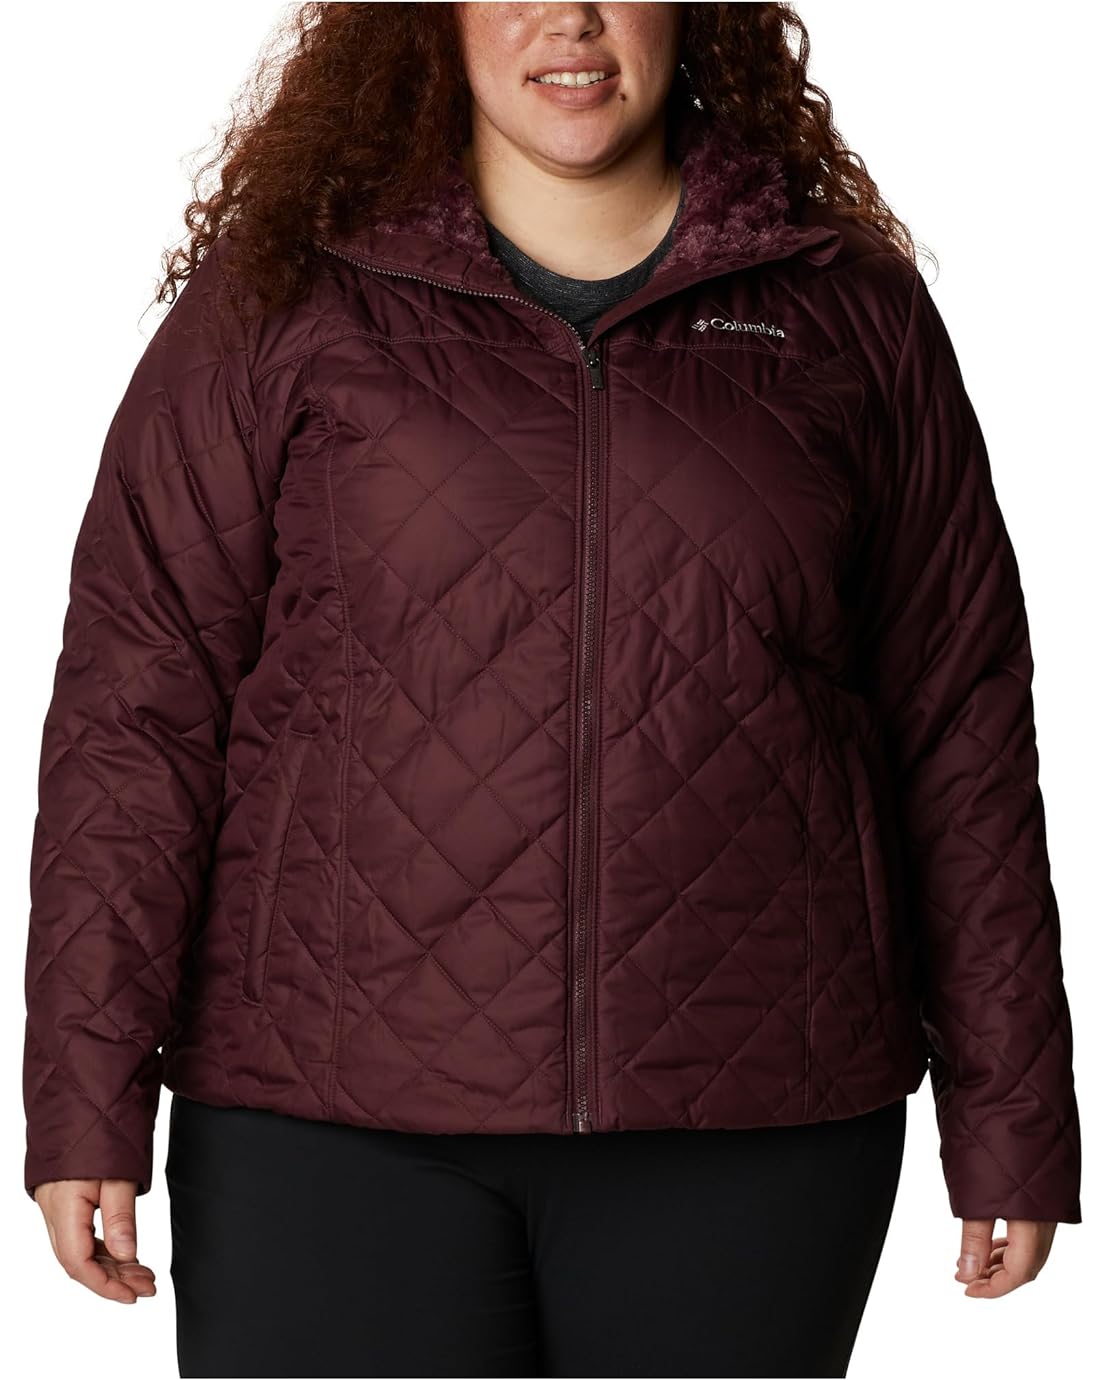 Womens Columbia Plus Size Copper Crest Hooded Jacket